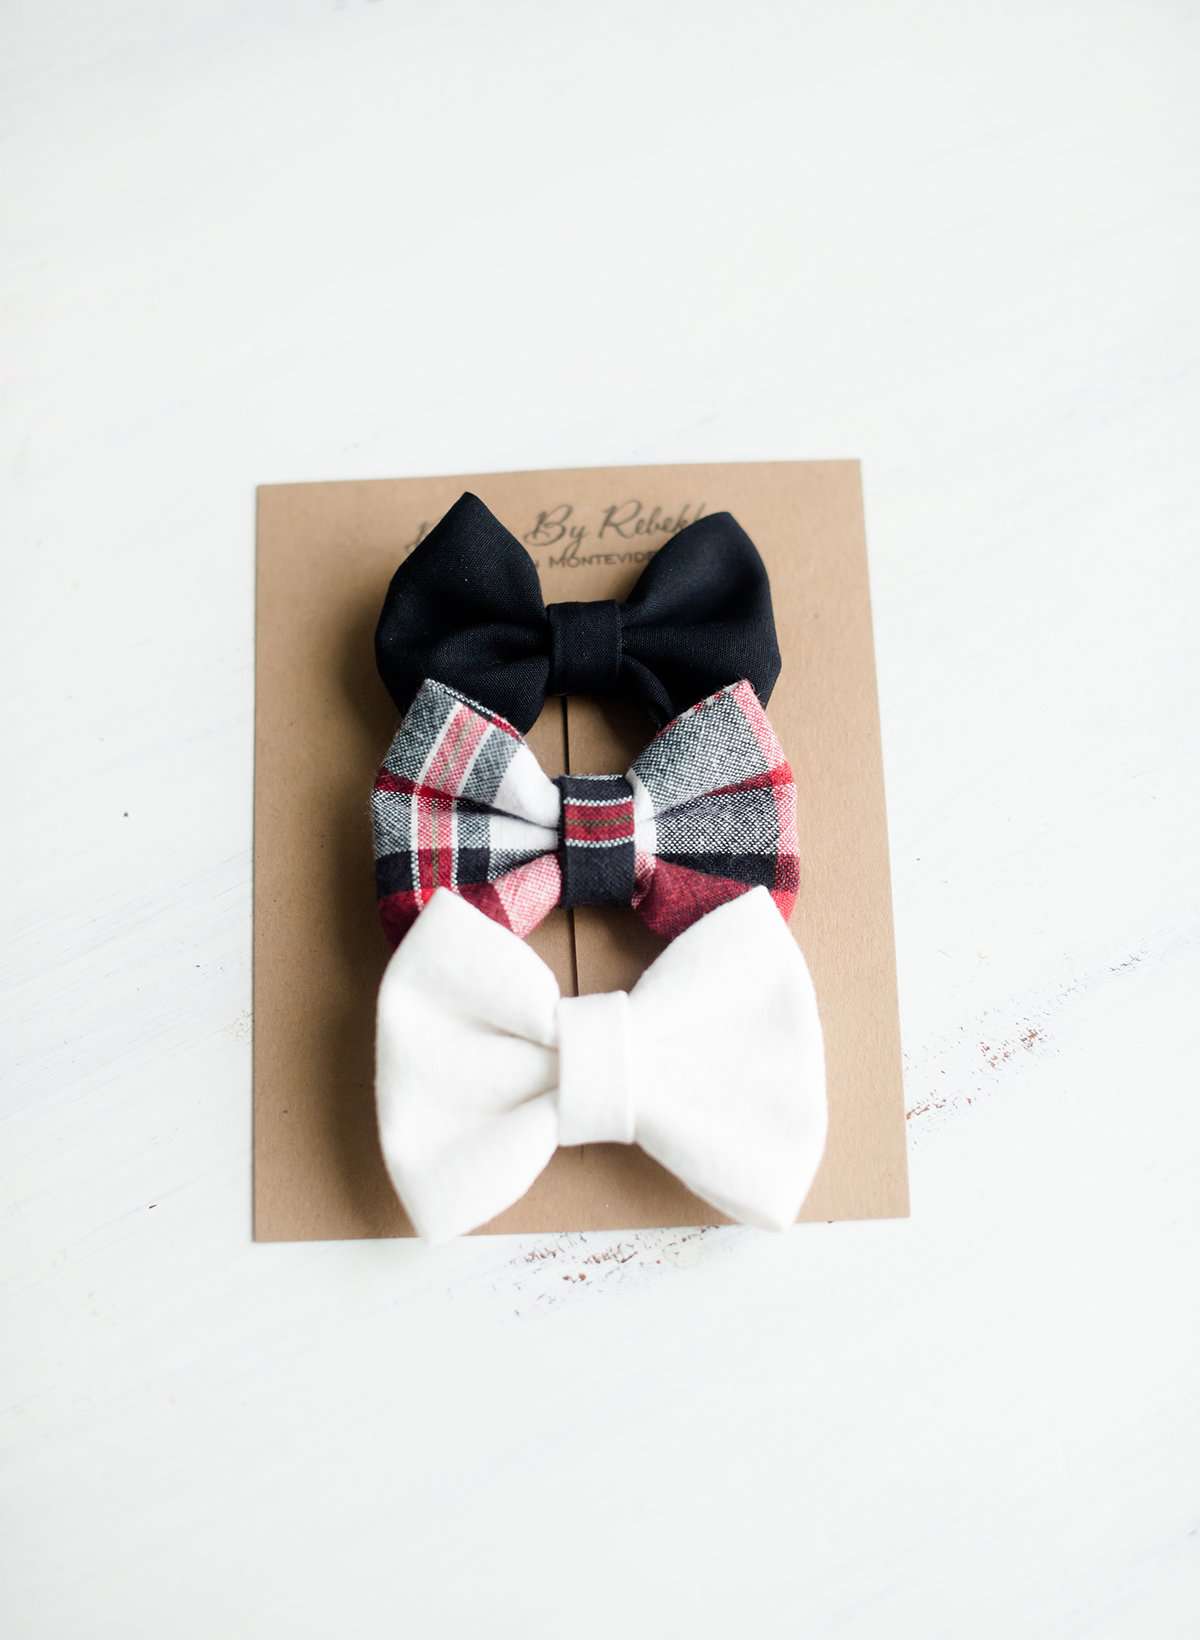 Little girls hair bow set of three. This shows a white, black and red plaid headband or alligator clip bow.